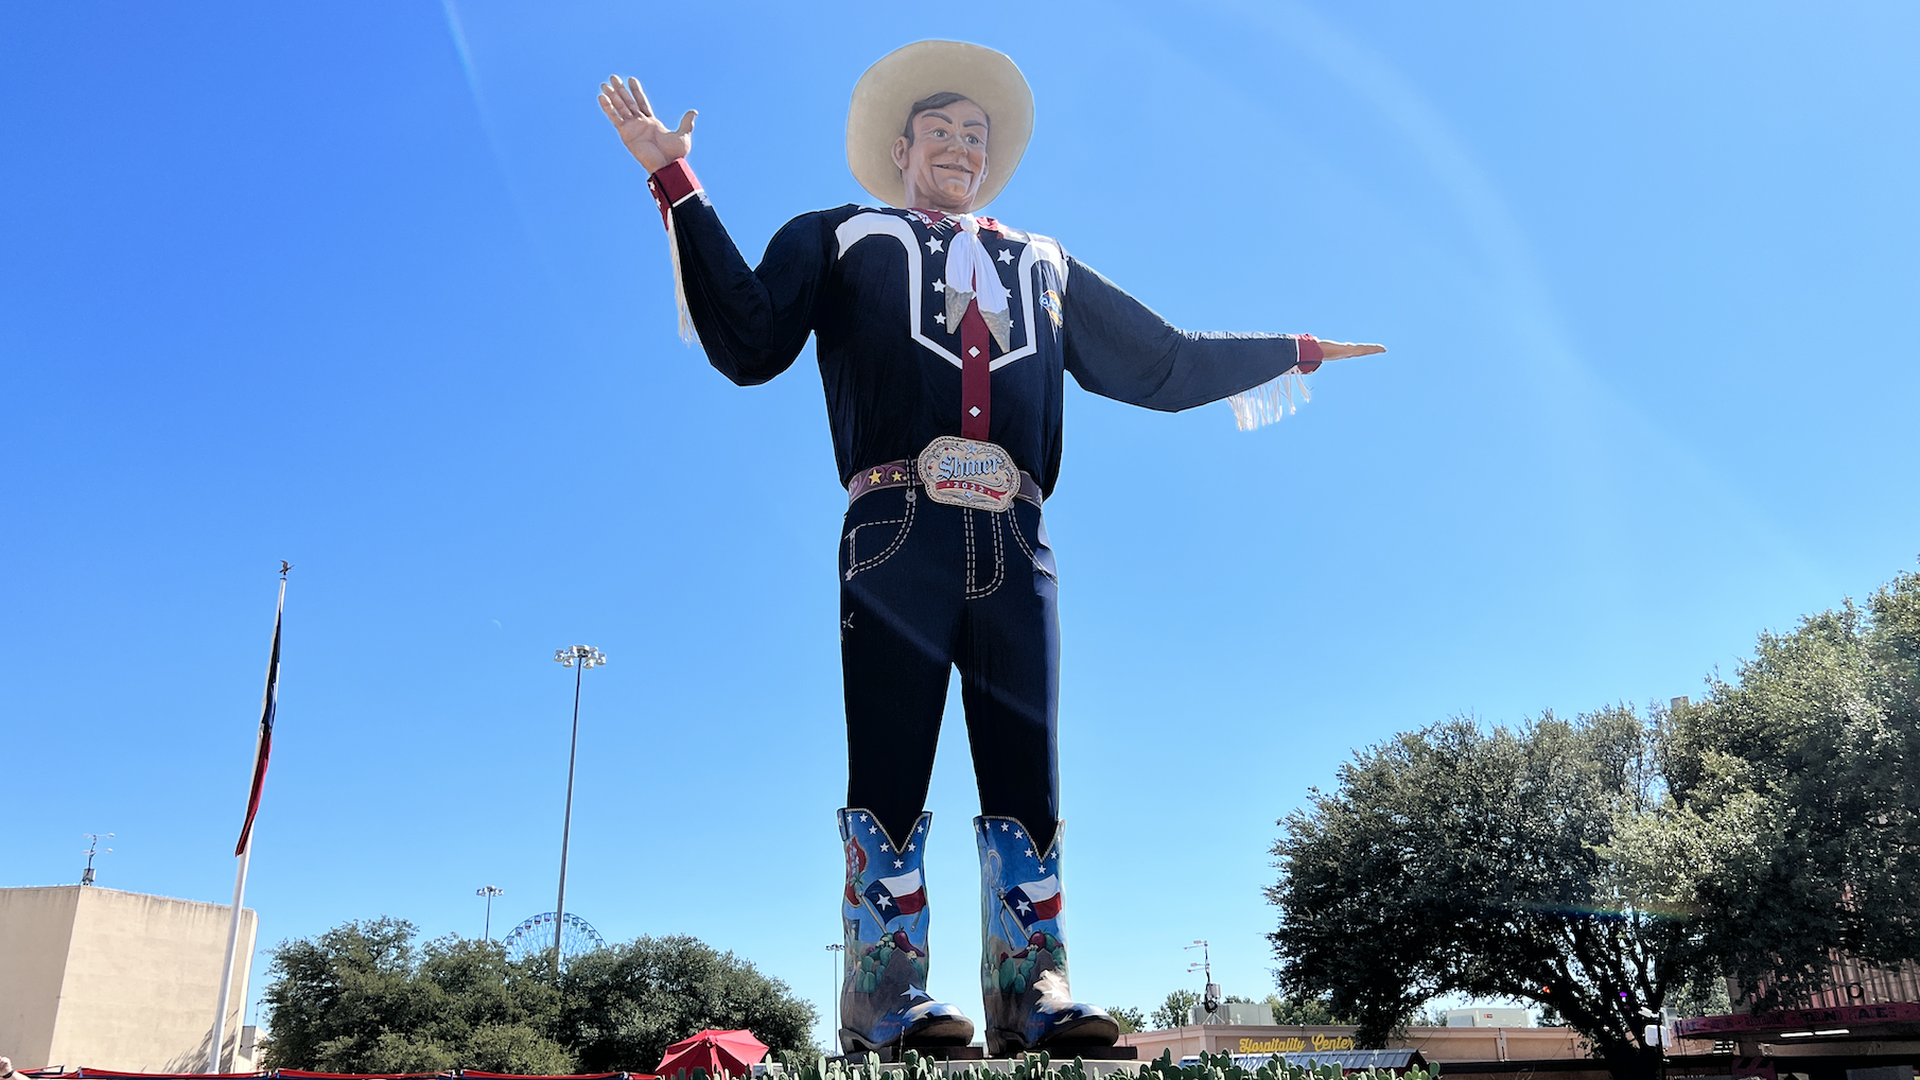 A photo of Big Tex at the State Fair of Texas